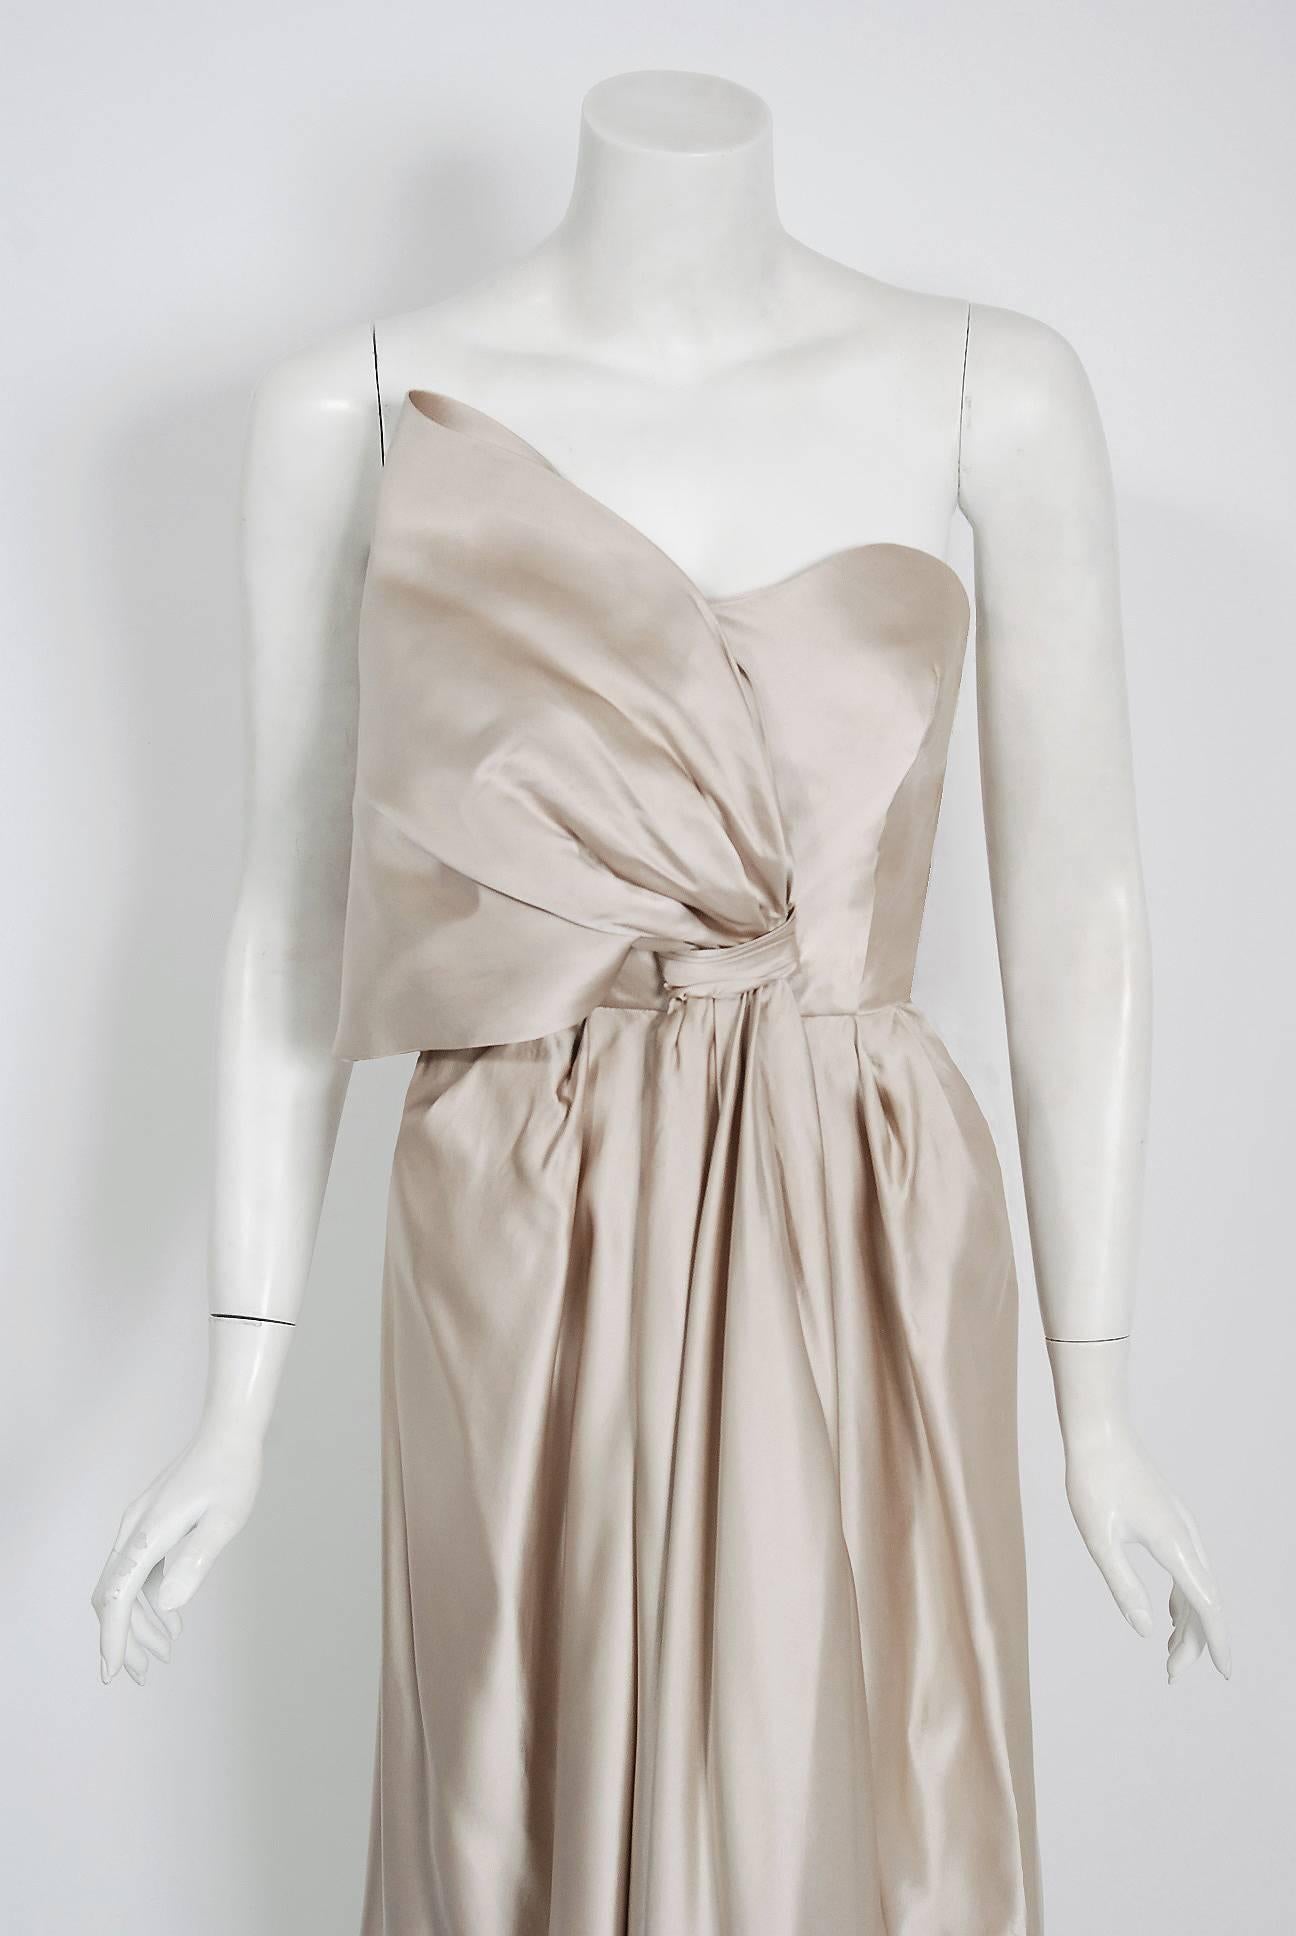 A breathtaking Saks Fifth Avenue champange silver shimmer silk-satin gown from the Old Hollywood era of glamour. The bodice has a unique sculpted asymmetric draped bow with seductive boned strapless! I adore the hourglass nipped waist